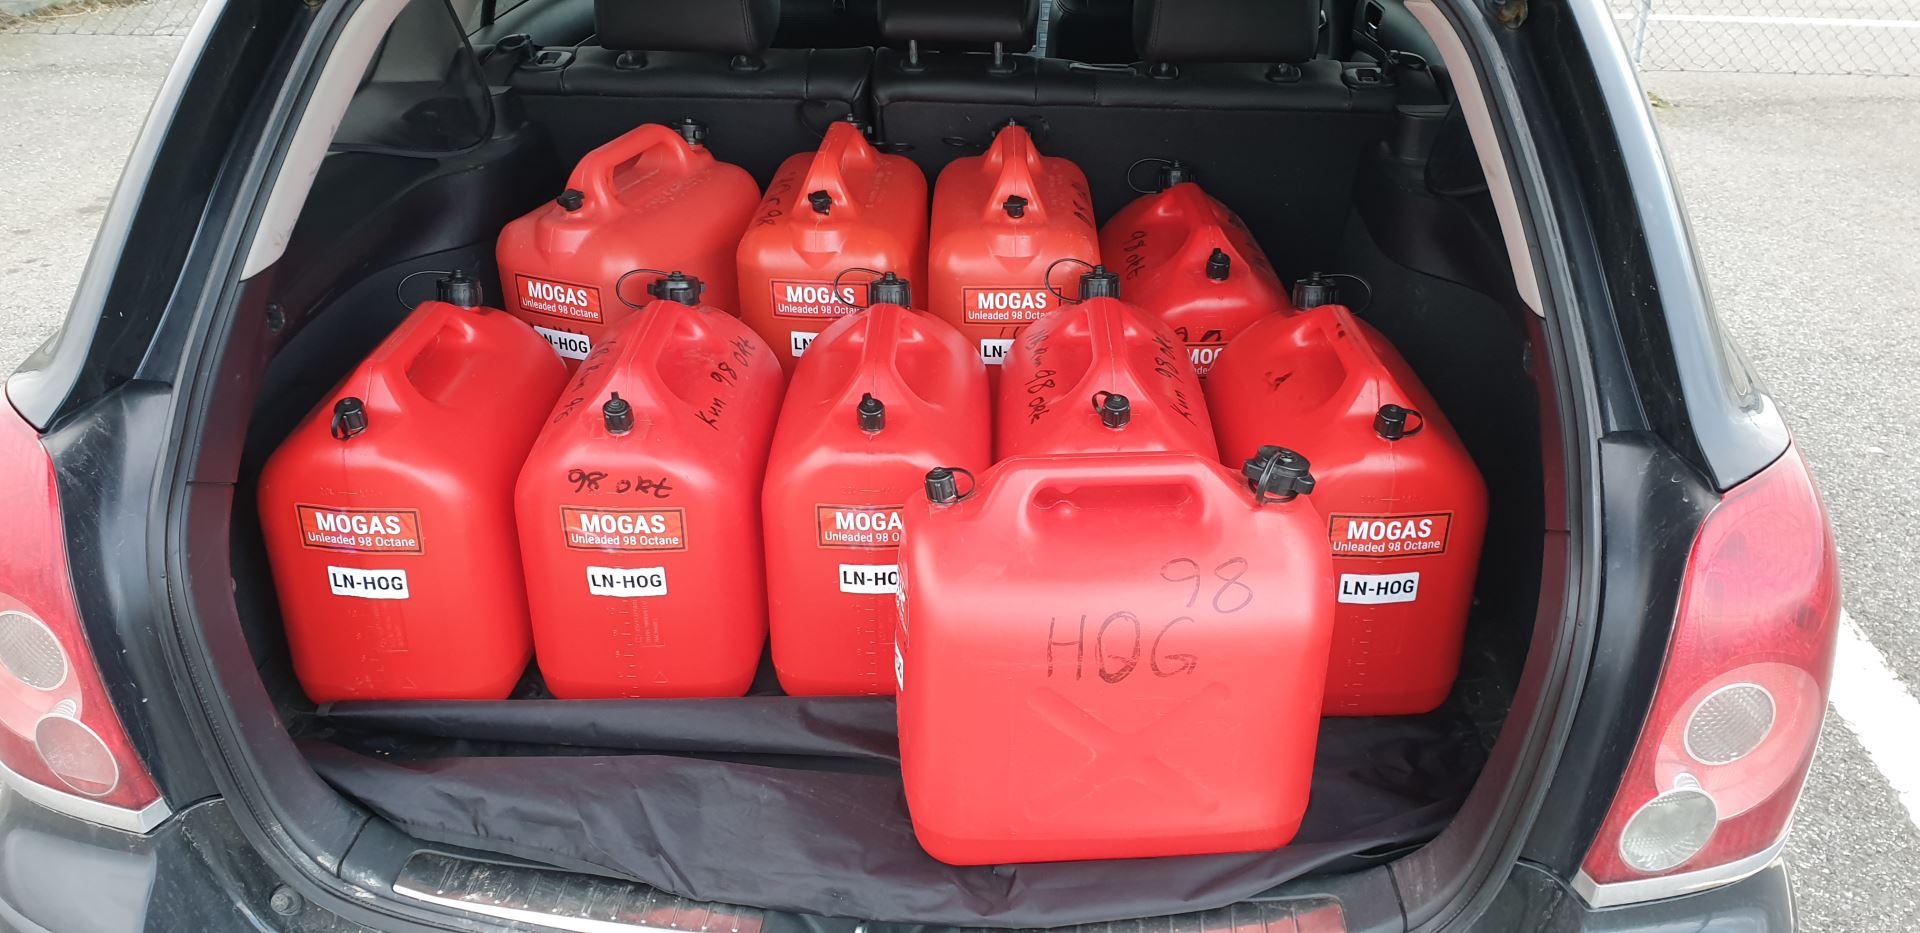 Fuel cans in the back of my car